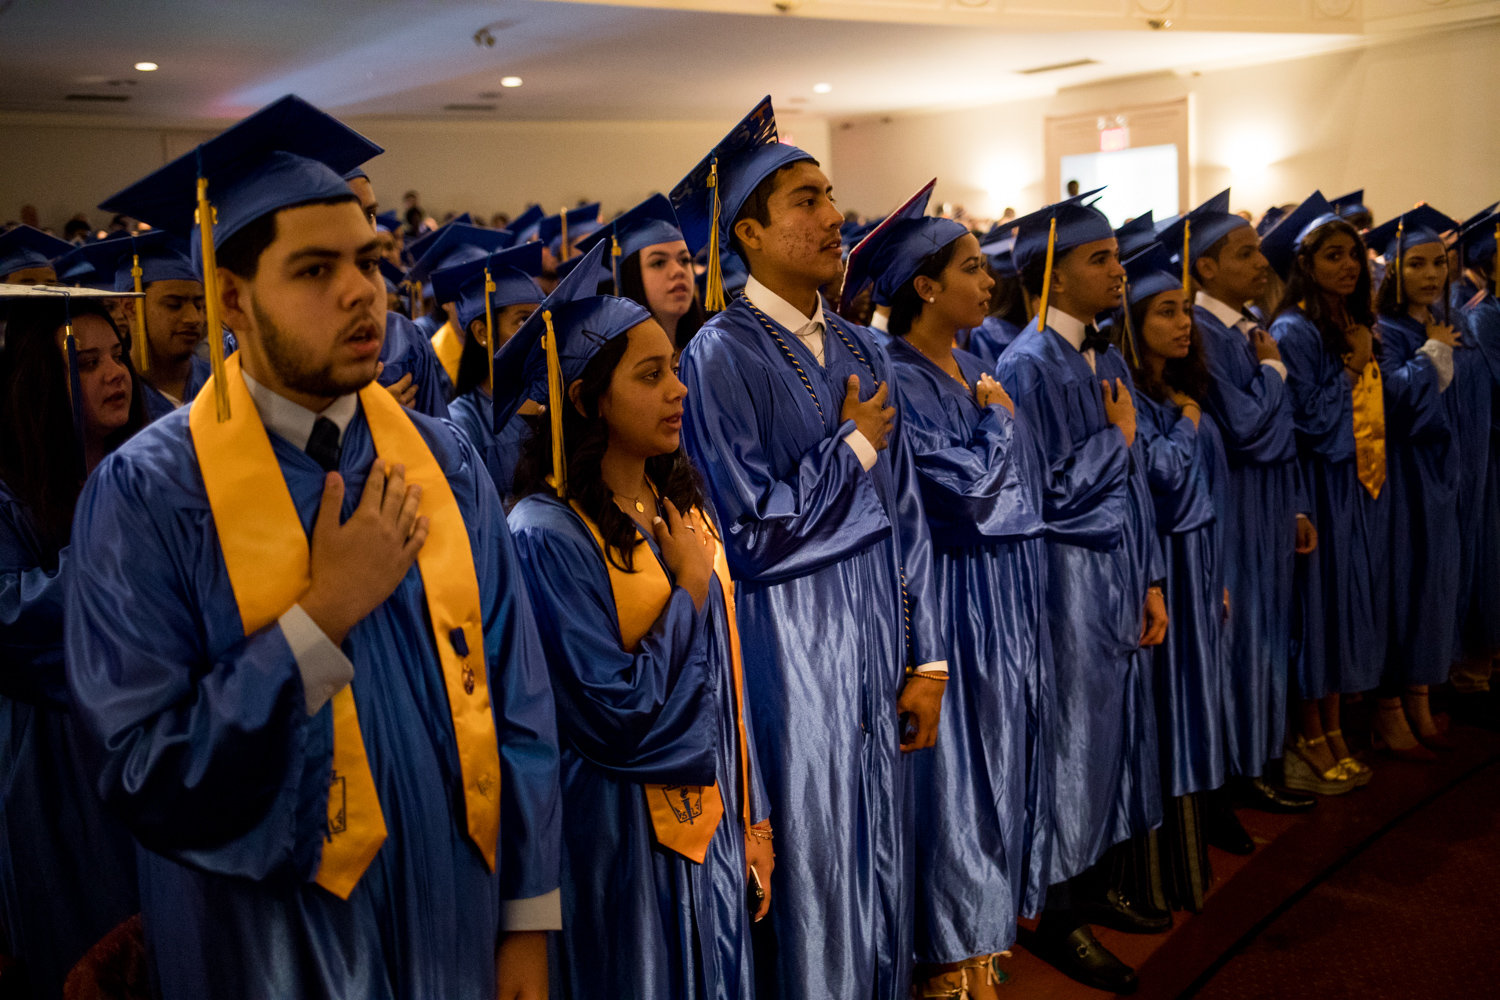 Graduation is taking on a new form this year due to the coronavirus pandemic, with many schools holding their ceremonies virtually. Others, like the Bronx School of Law and Finance, have opted to slate their ceremonies for later in the year.